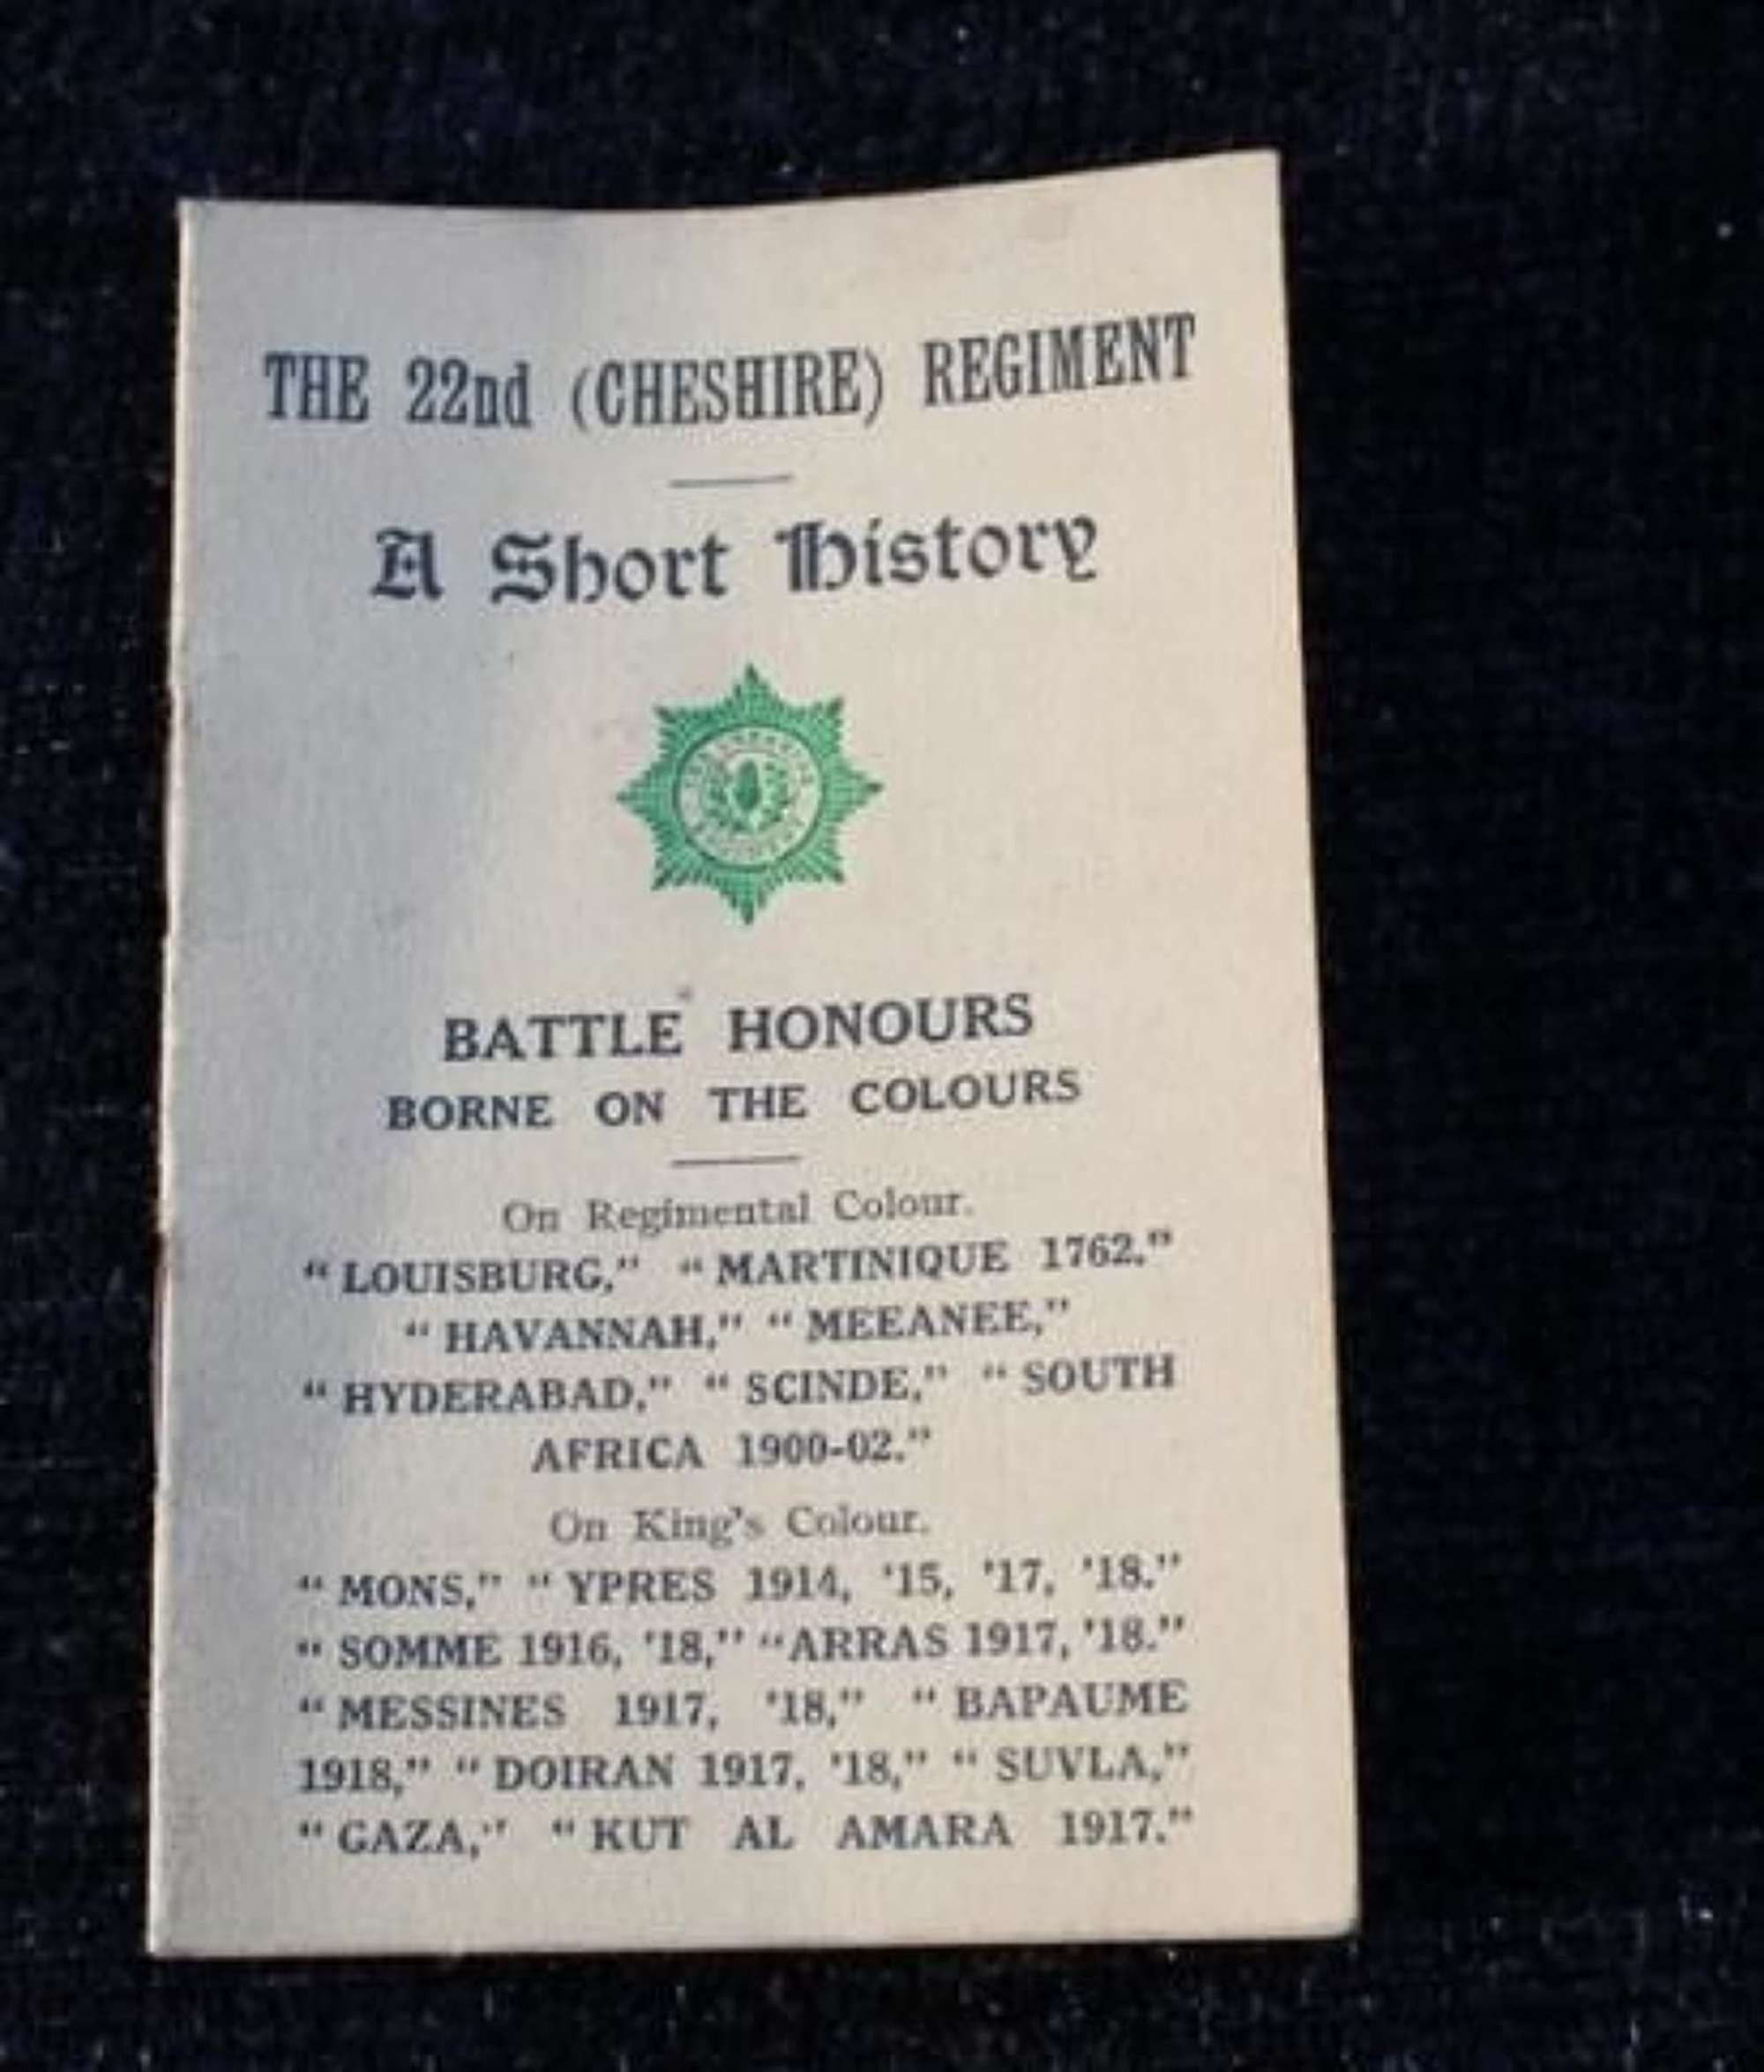 History Of The 22nd Cheshire Regiment